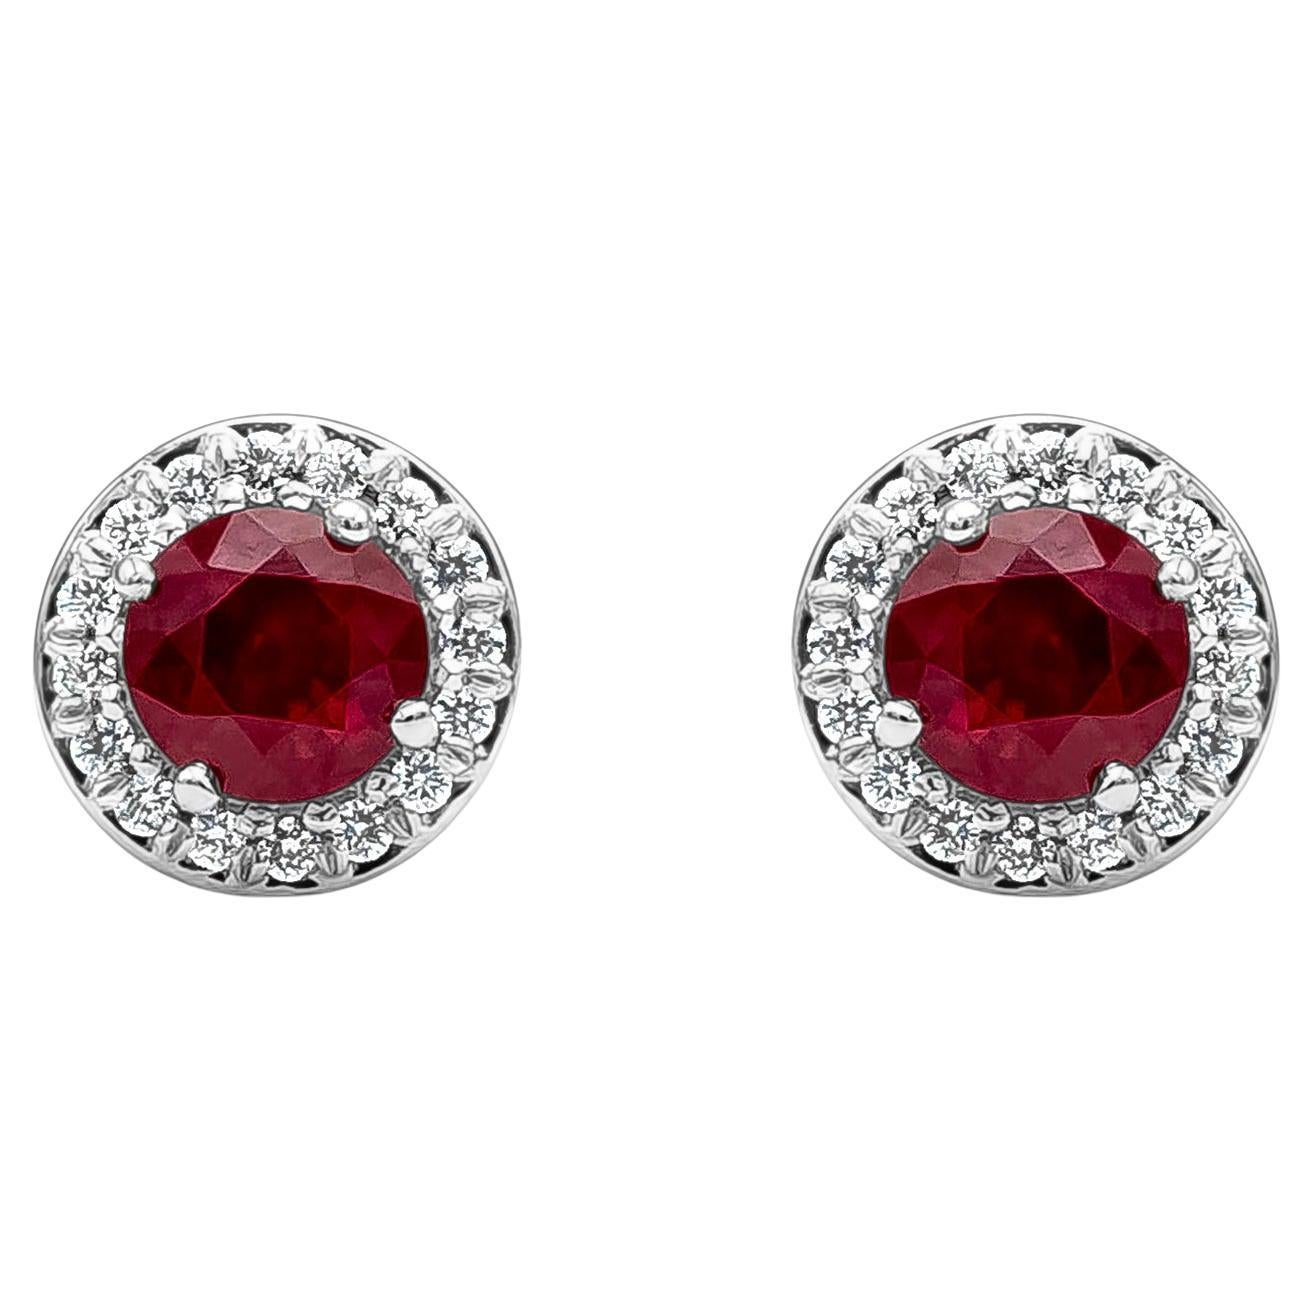 Roman Malakov 1.35 Carats Total Round Cut Ruby and Diamond Halo Stud Earrings For Sale